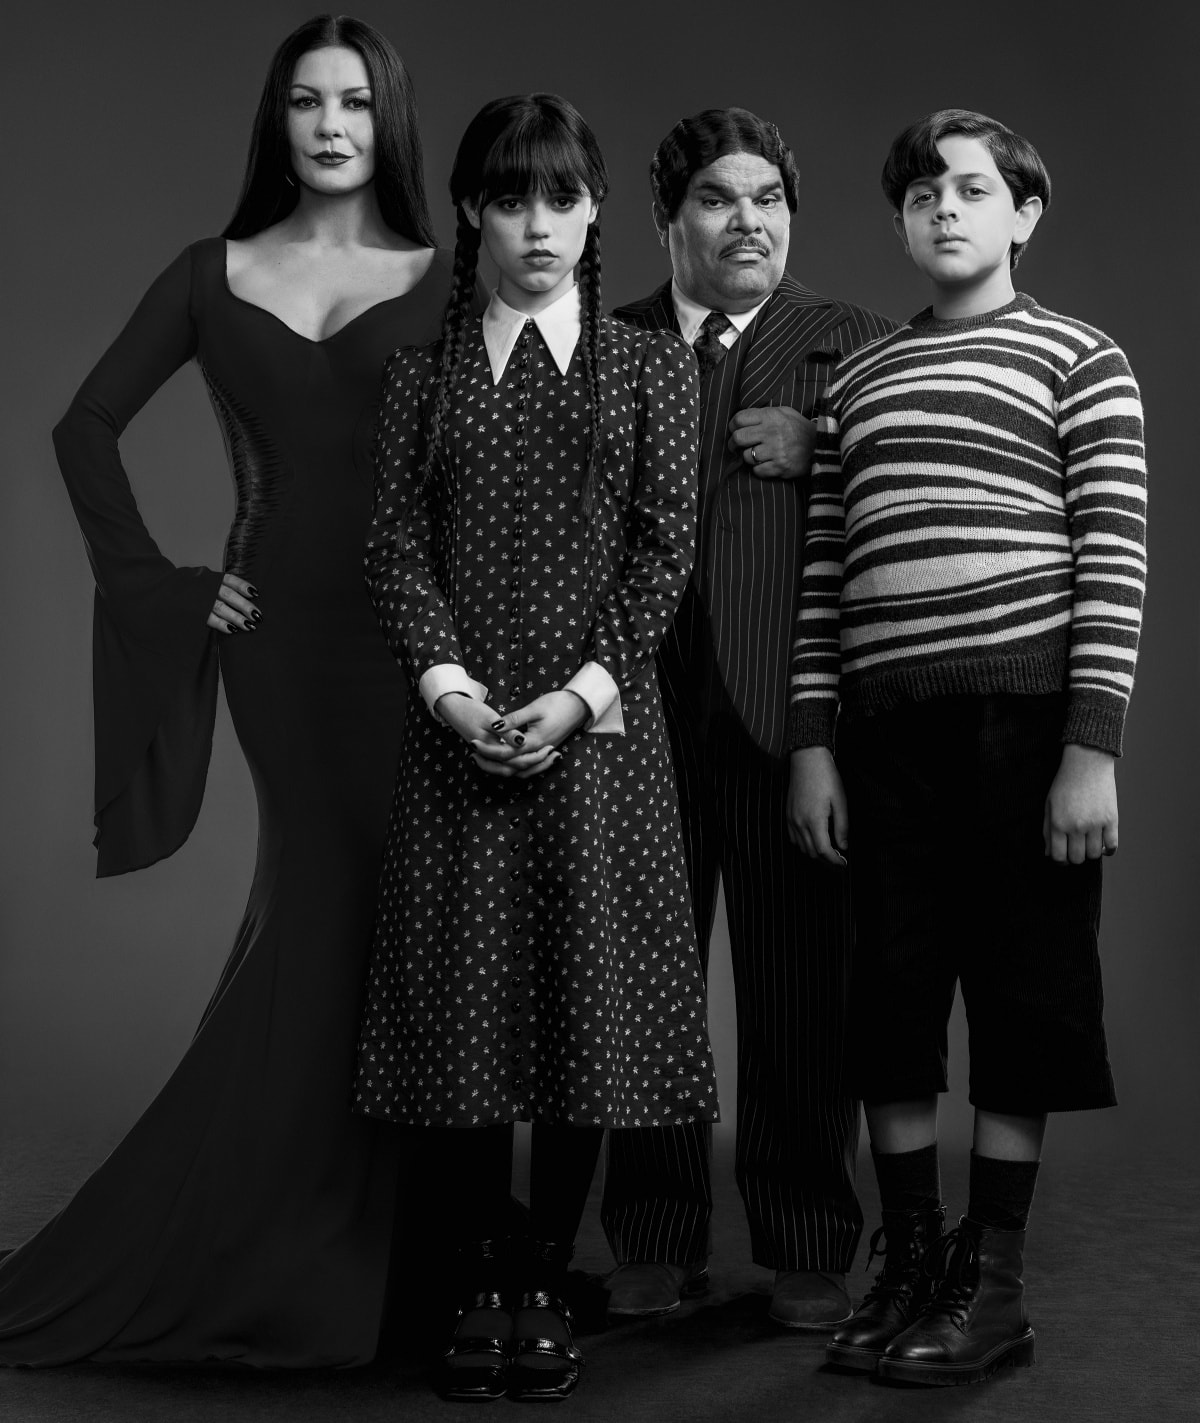 The Addams Family is back with its satirical version of the ideal nuclear family and macabre elements for a dark twist